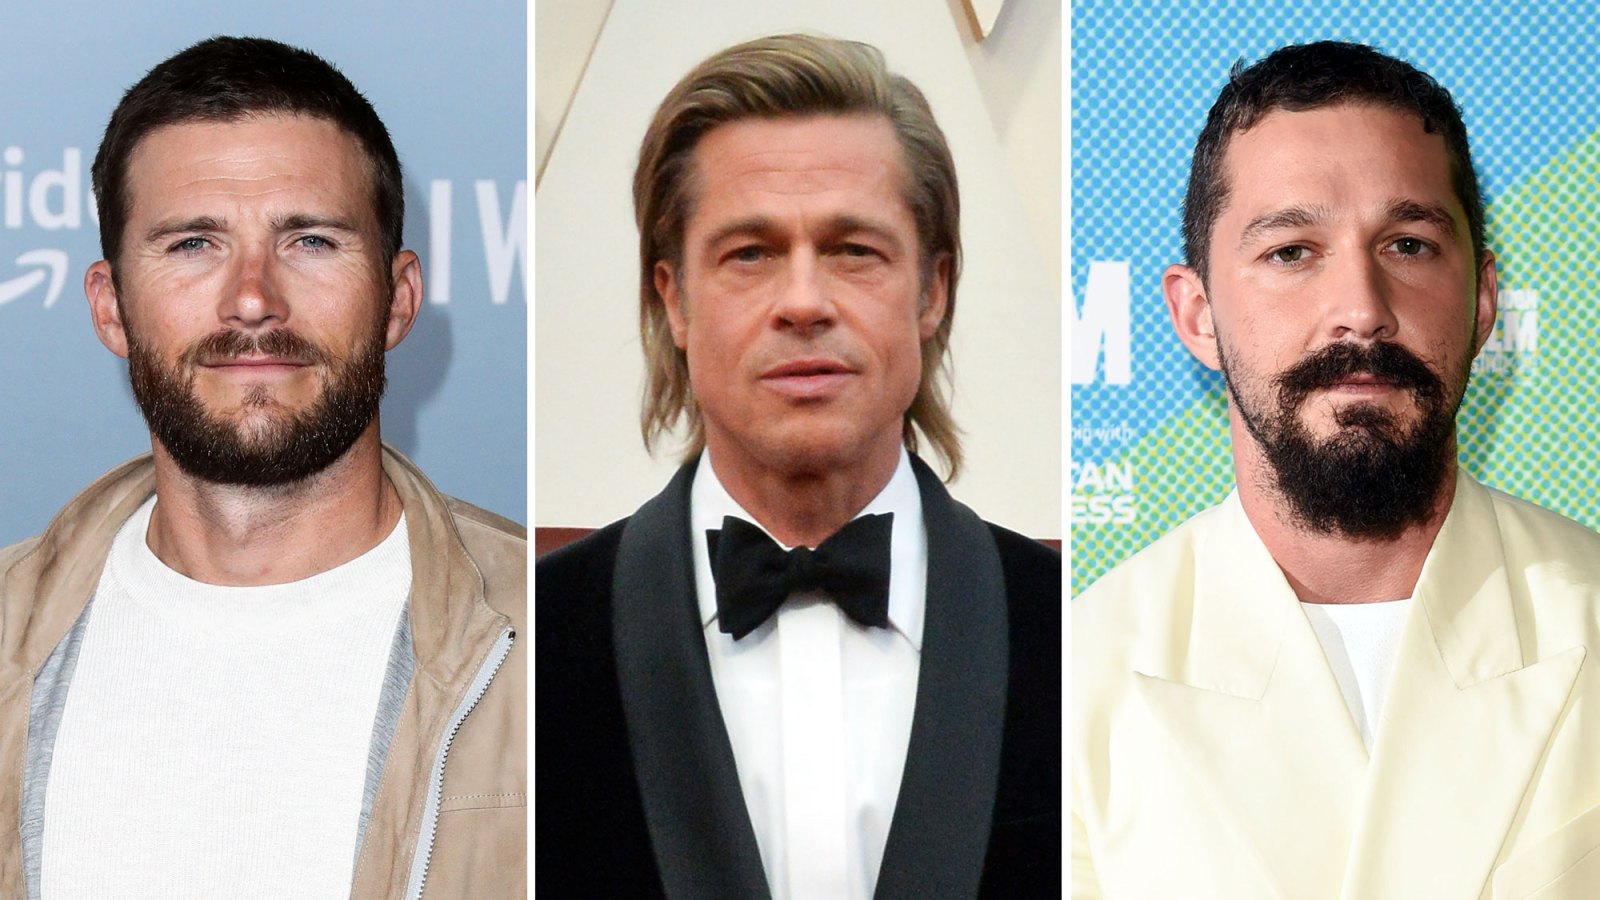 Scott Eastwood Claims Brad Pitt Broke Up a Volatile Moment Between Him and Shia LaBeouf on Set